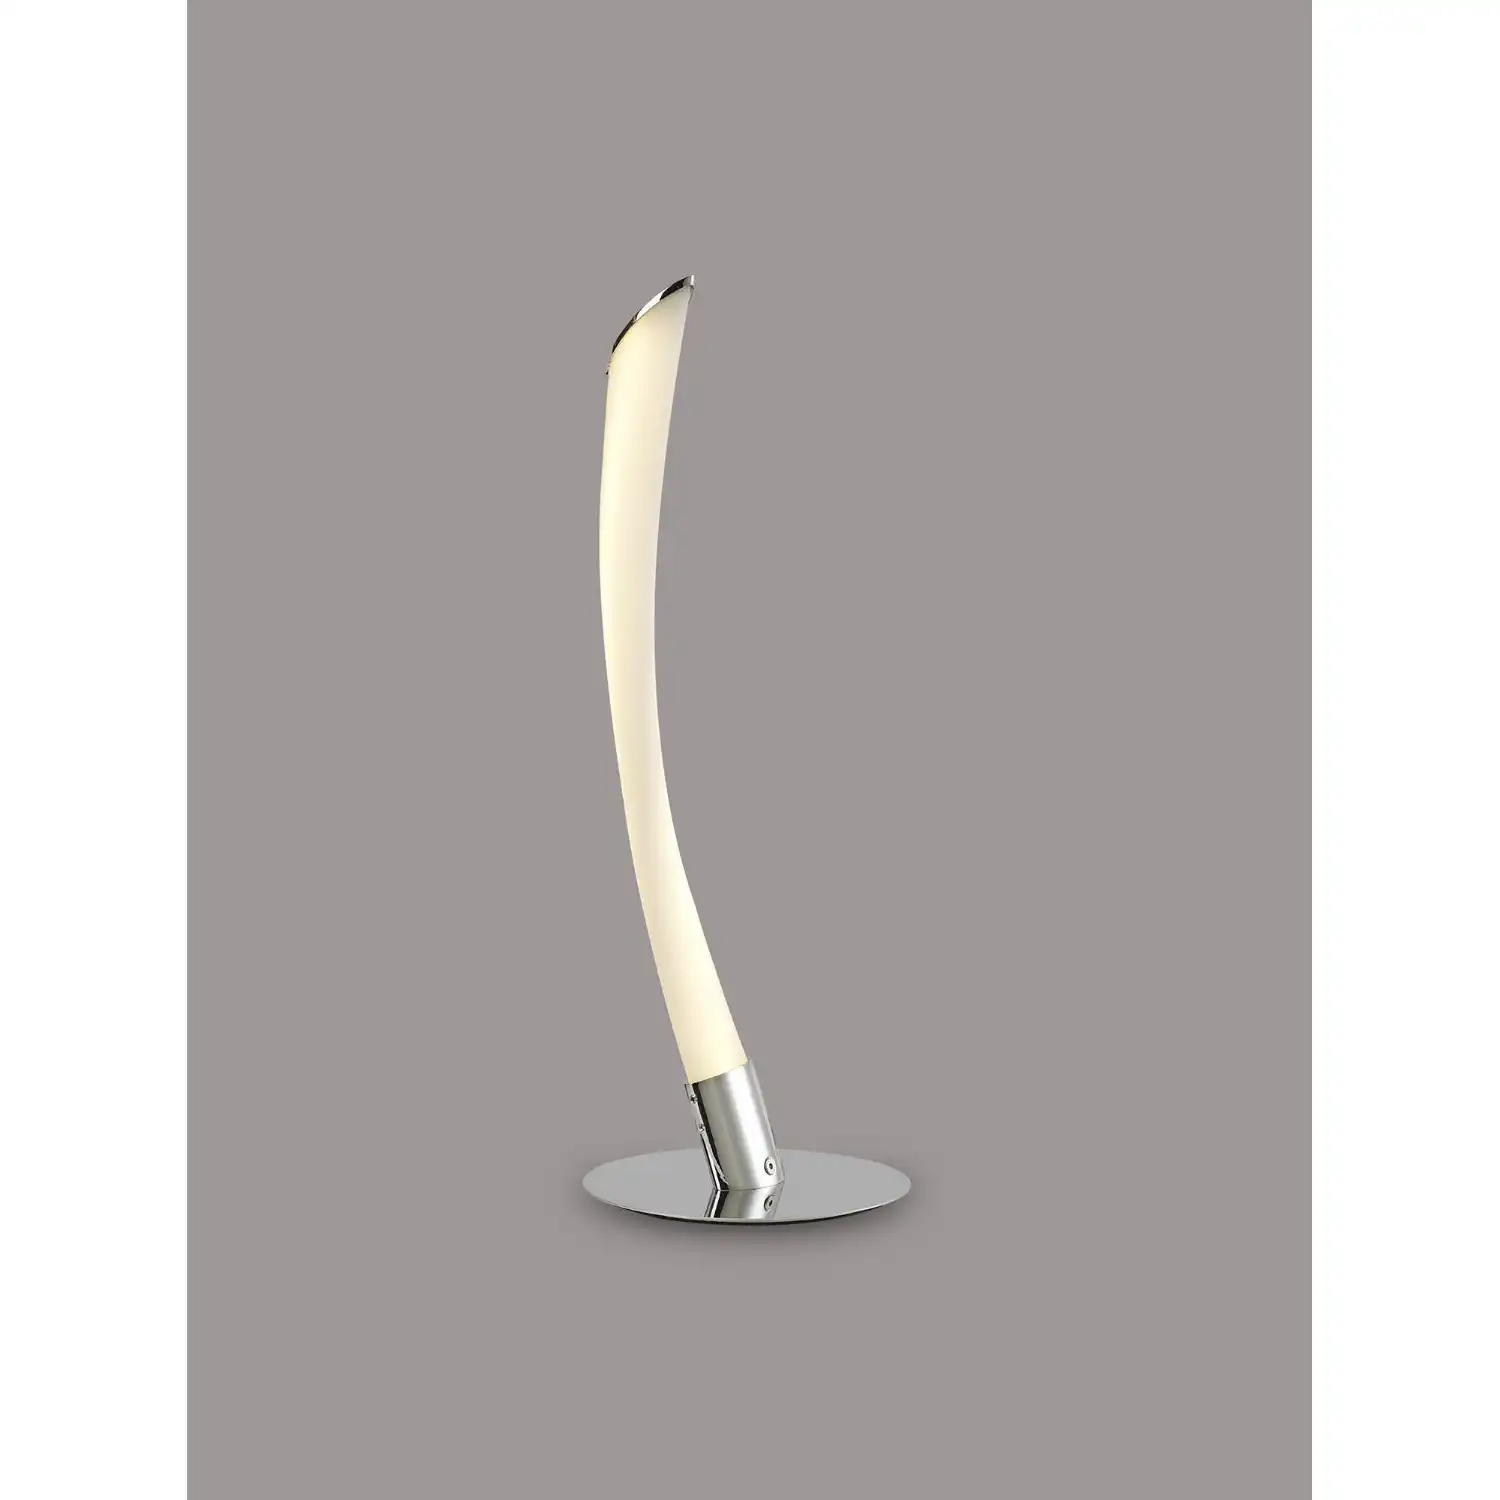 Armonia 1 Light Table Lamp, 10W LED, 3000K, 750lm, Polished Chrome Frosted Acrylic, 3yrs Warranty